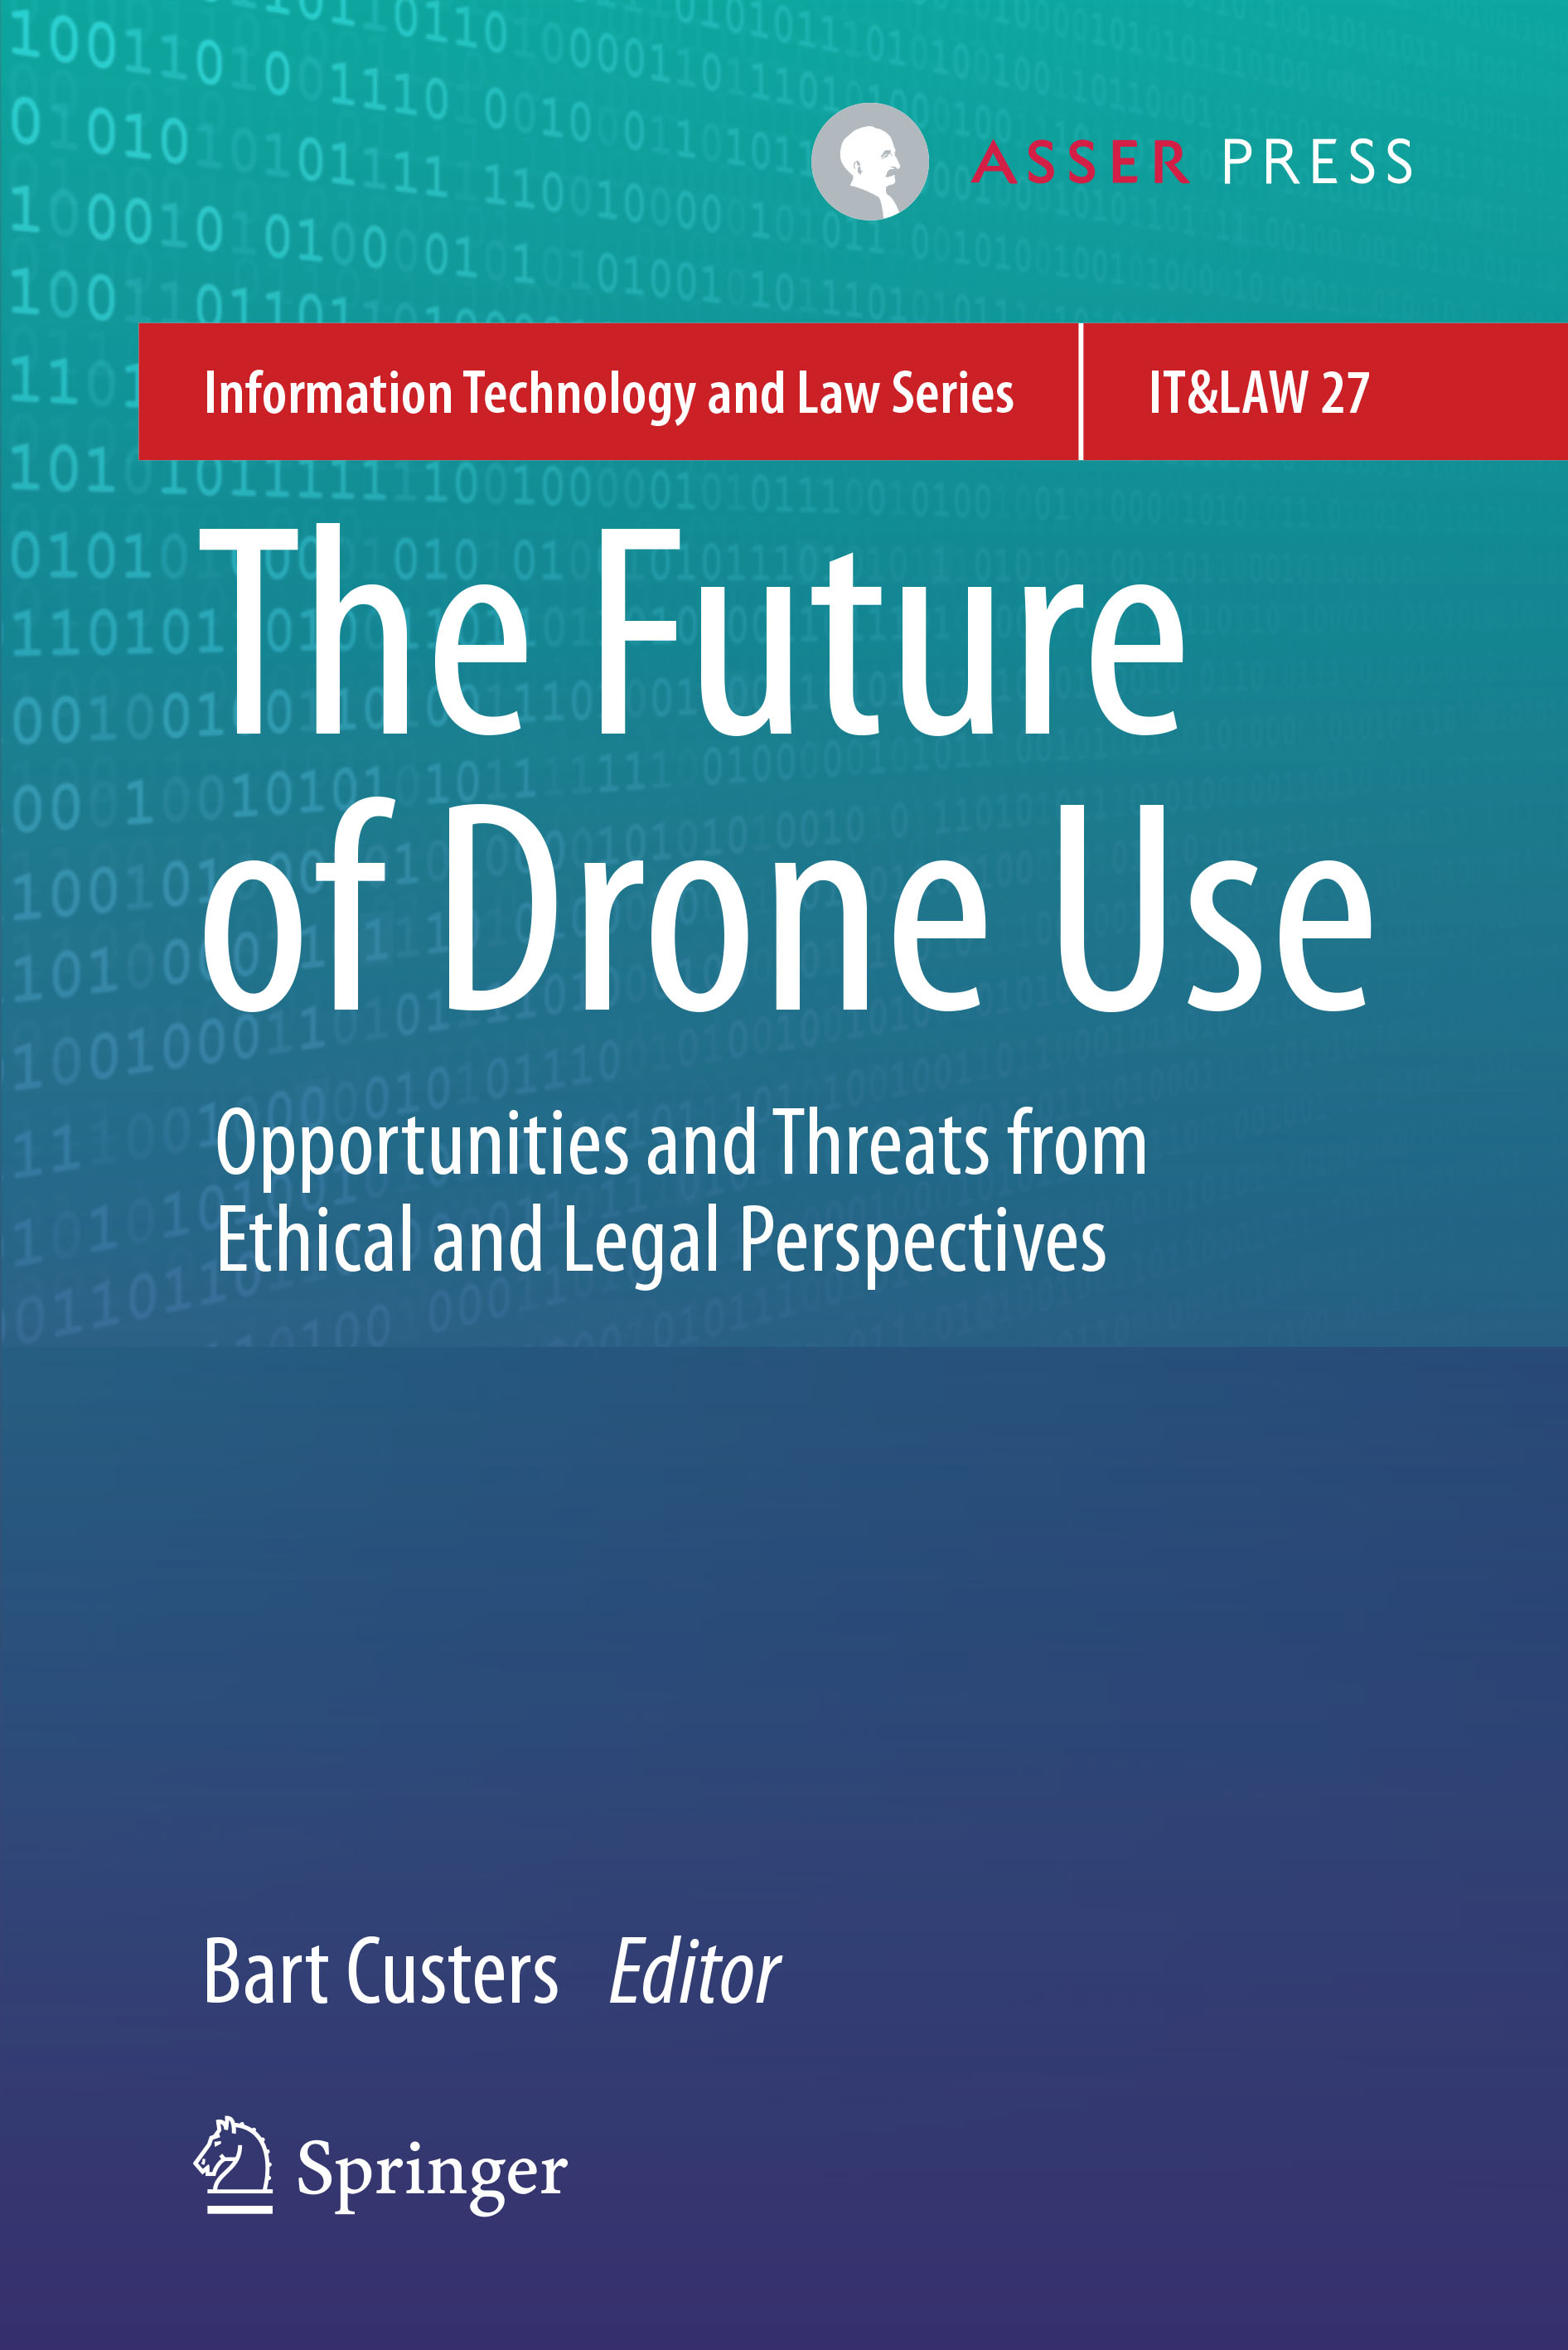 The Future of Drone Use - Opportunities and Threats From Ethical and Legal Perspectives